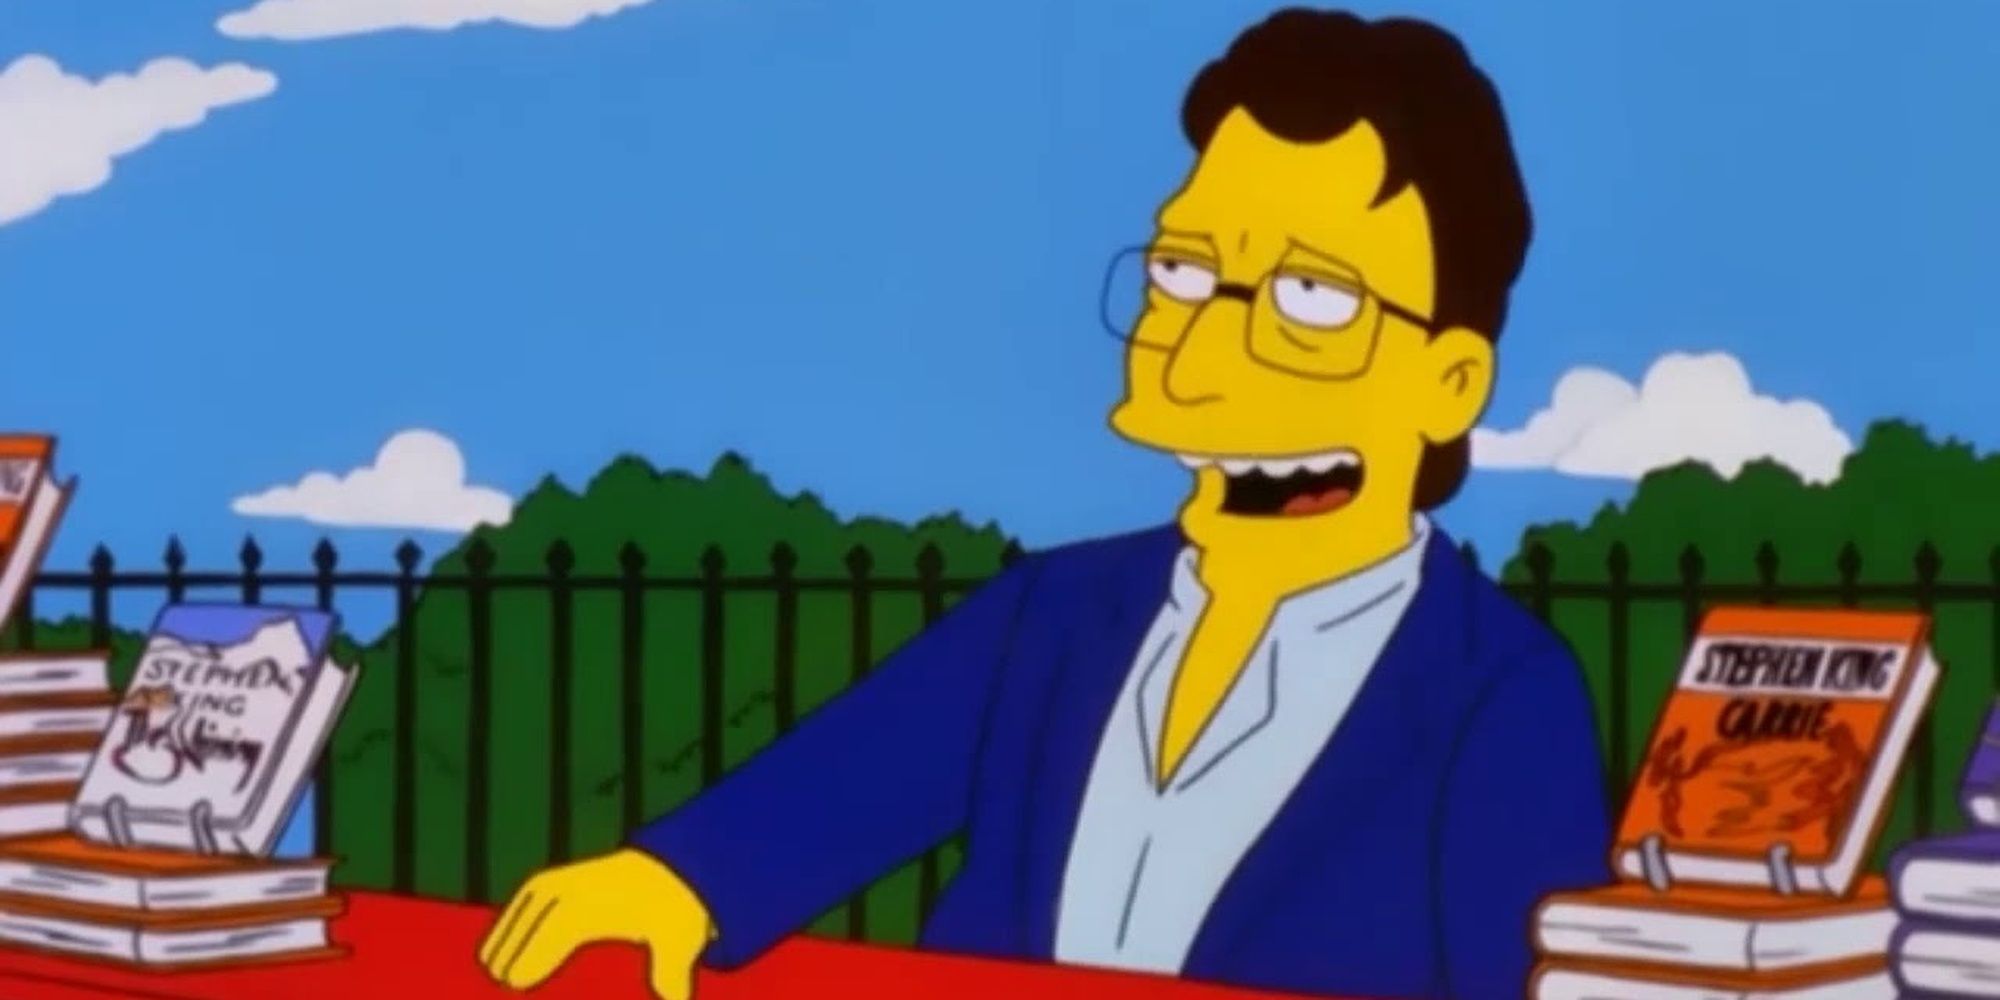 Stephen King in The Simpsons